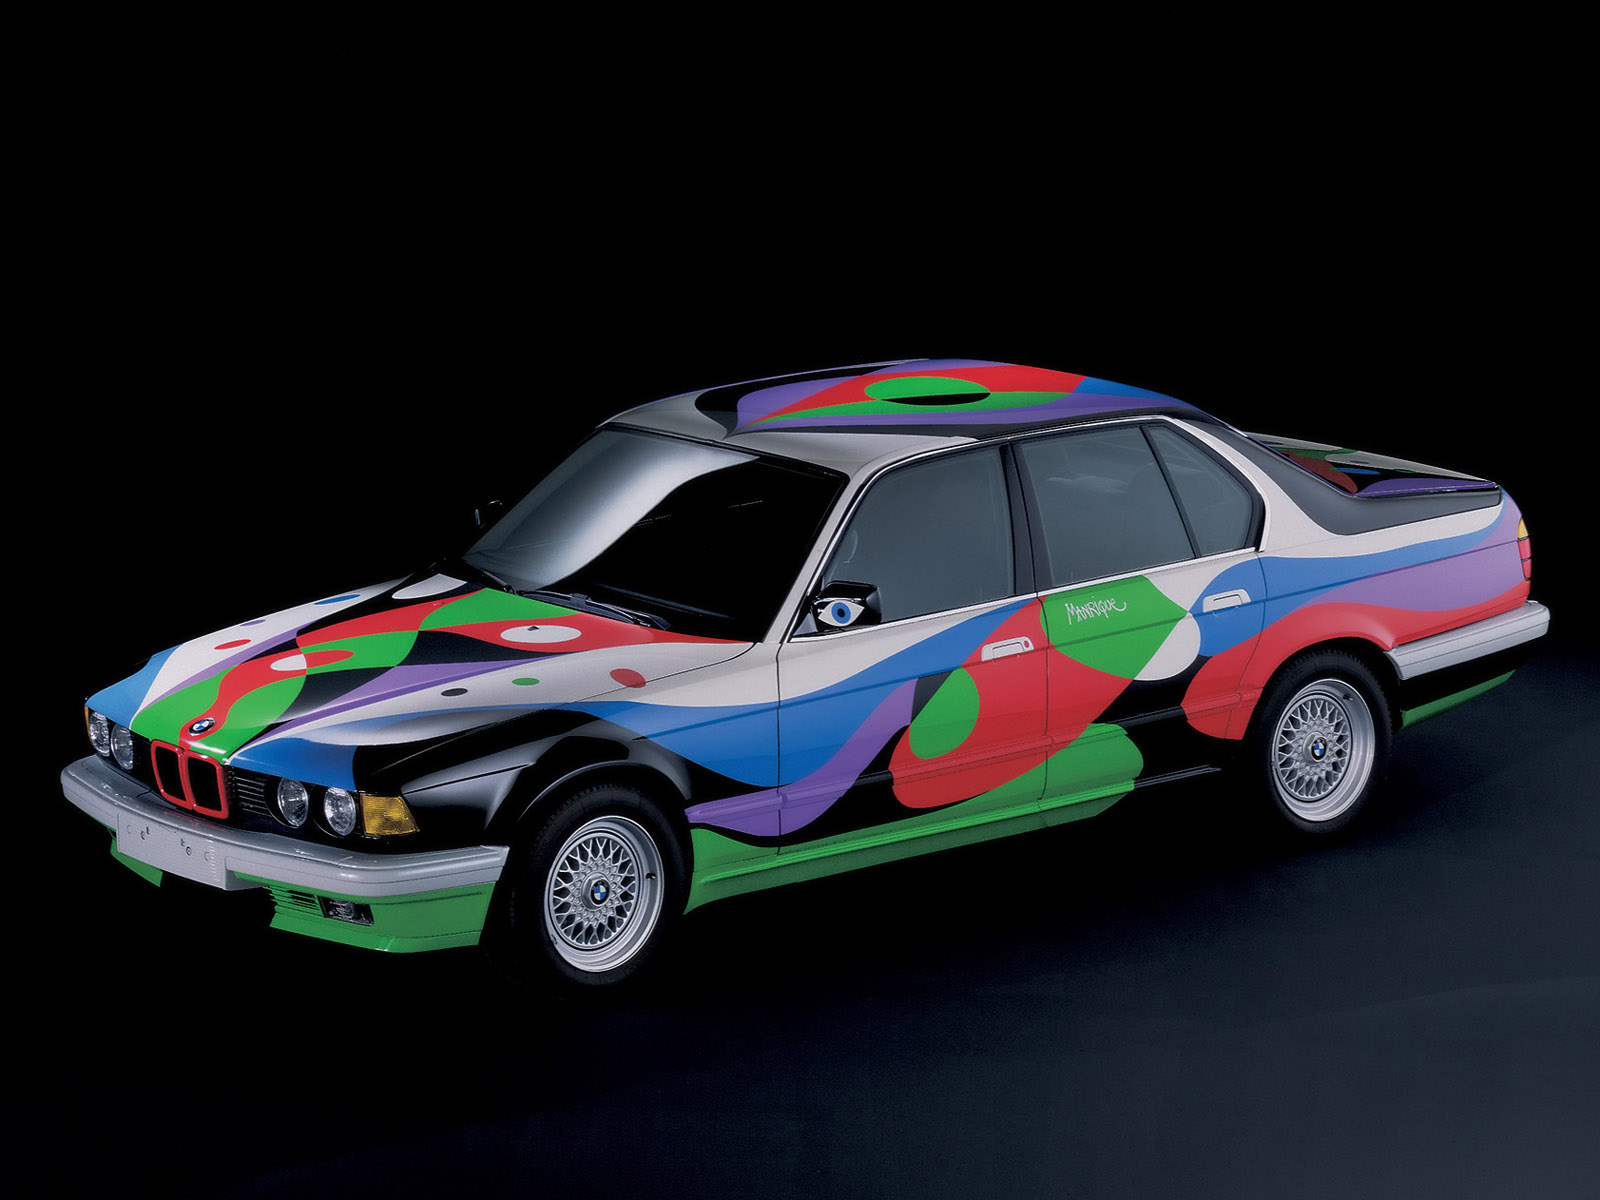 1990 Bmw 7 Series 730i Art Car By Cesar Manrique E32 Wallpapers Hd Desktop And Mobile Backgrounds